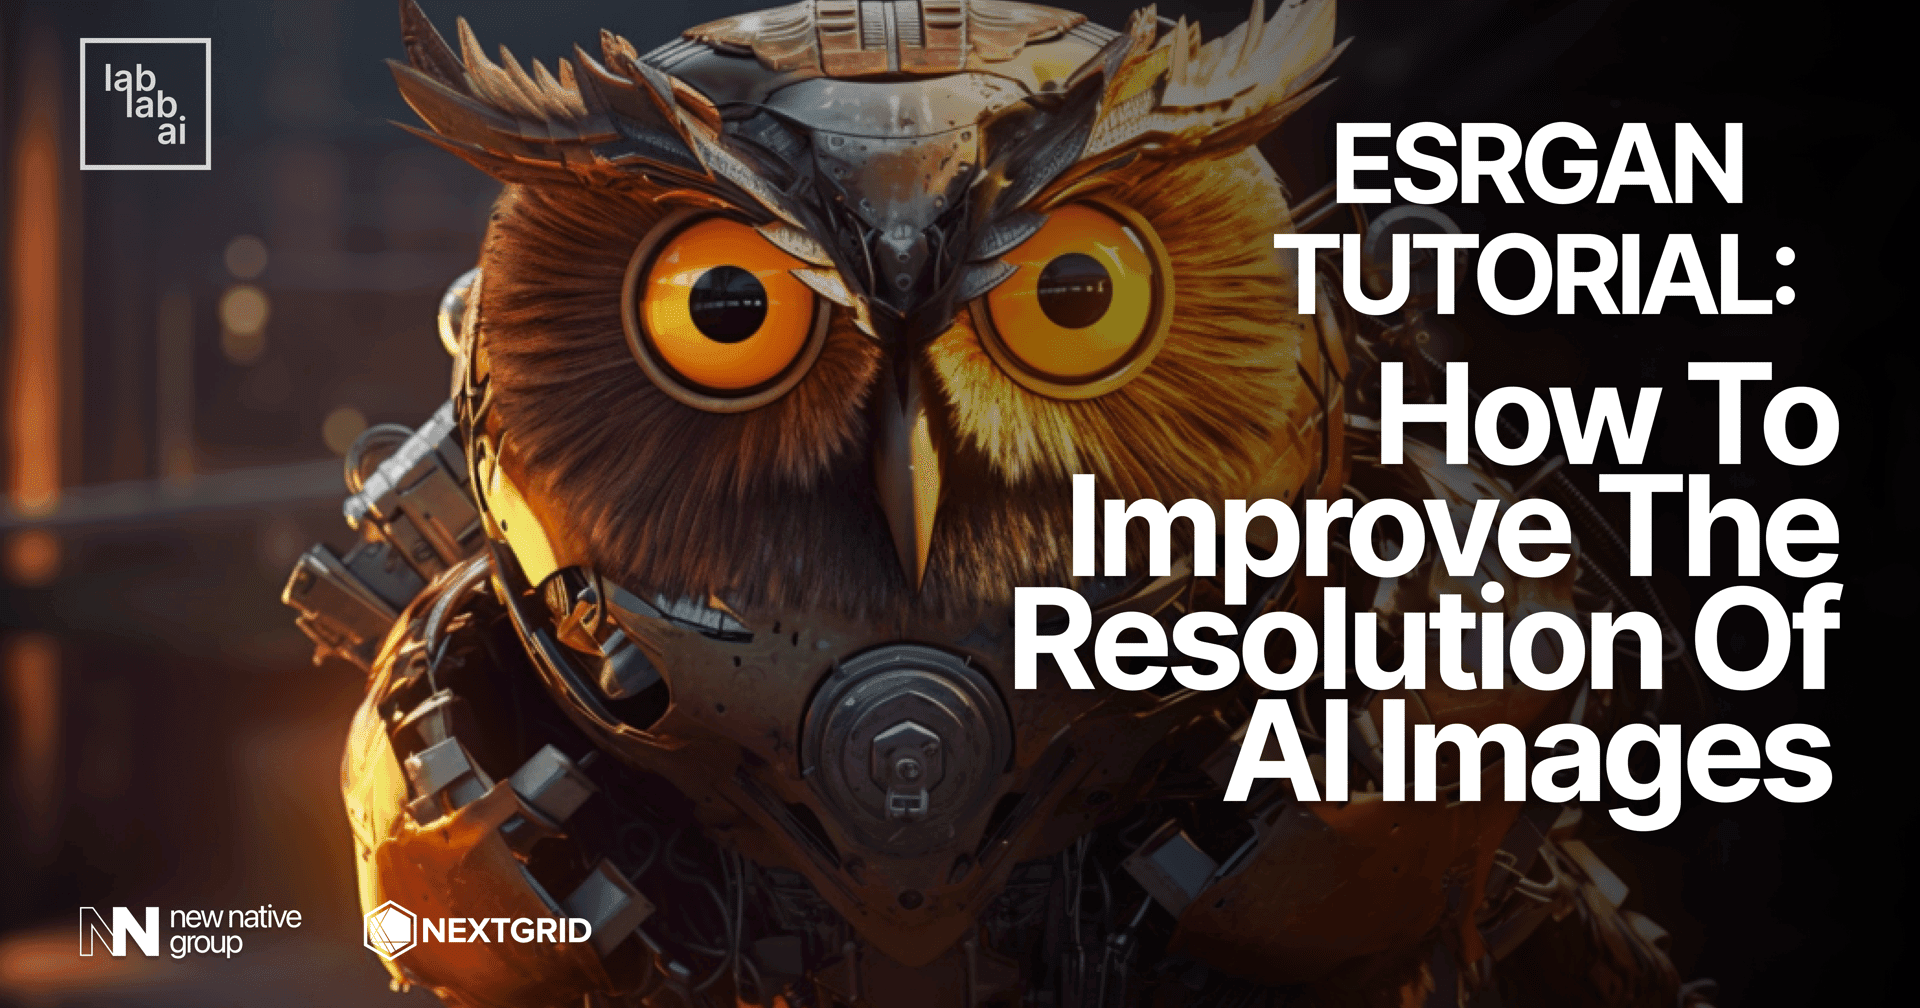 Esrgan tutoroial: how to improve the resolution of AI images